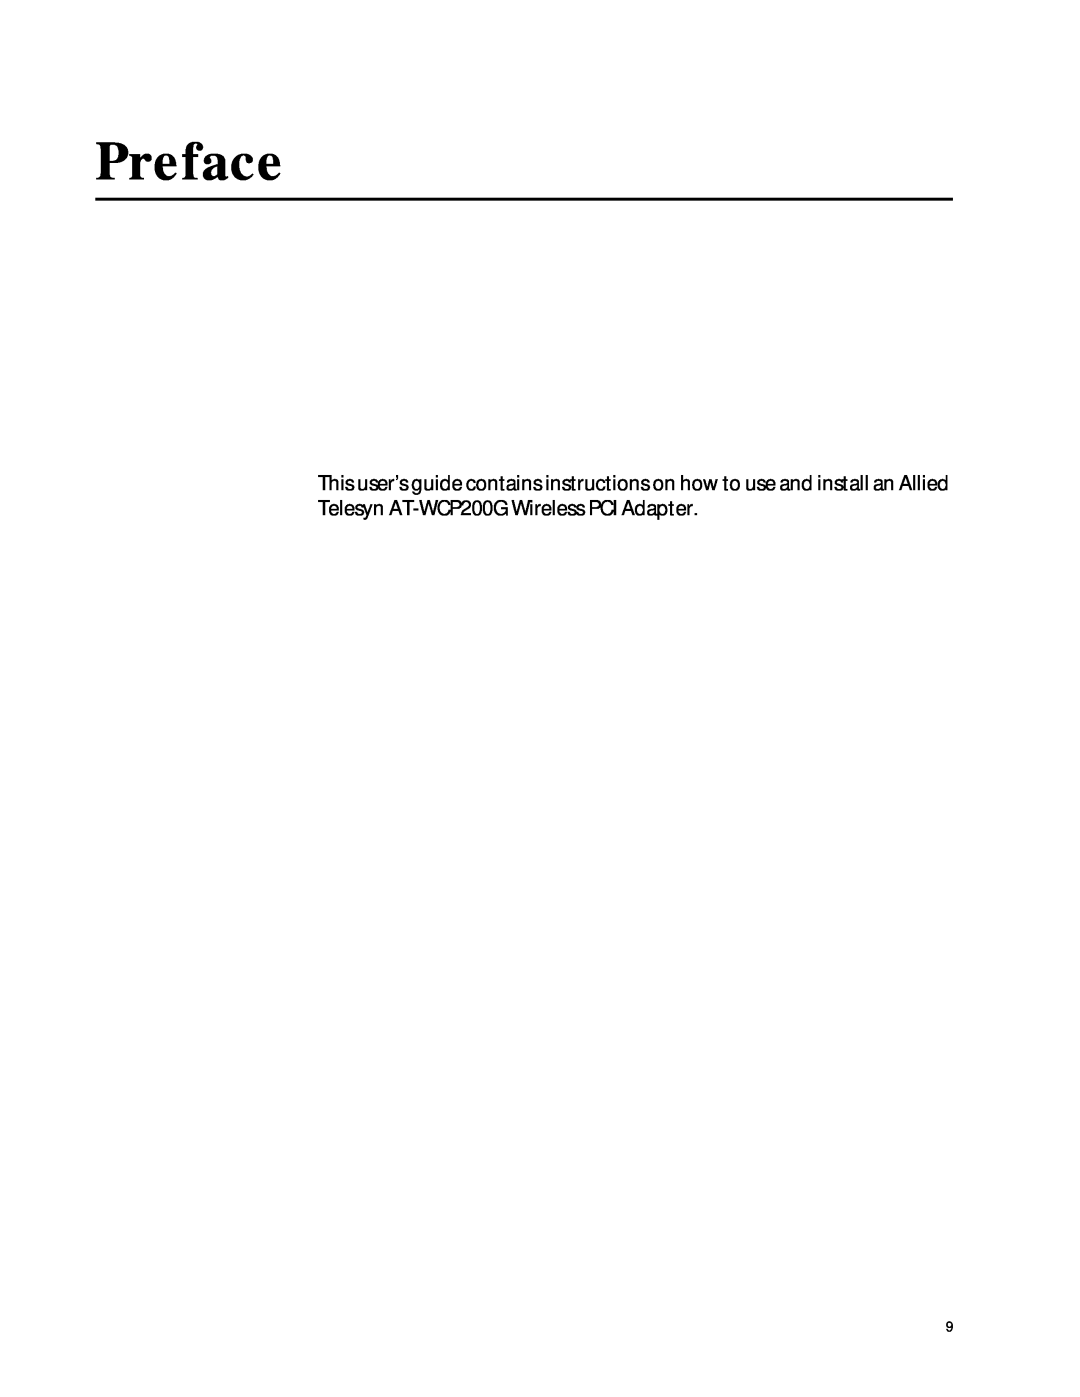 Allied Telesis AT-WCP200G manual Preface 